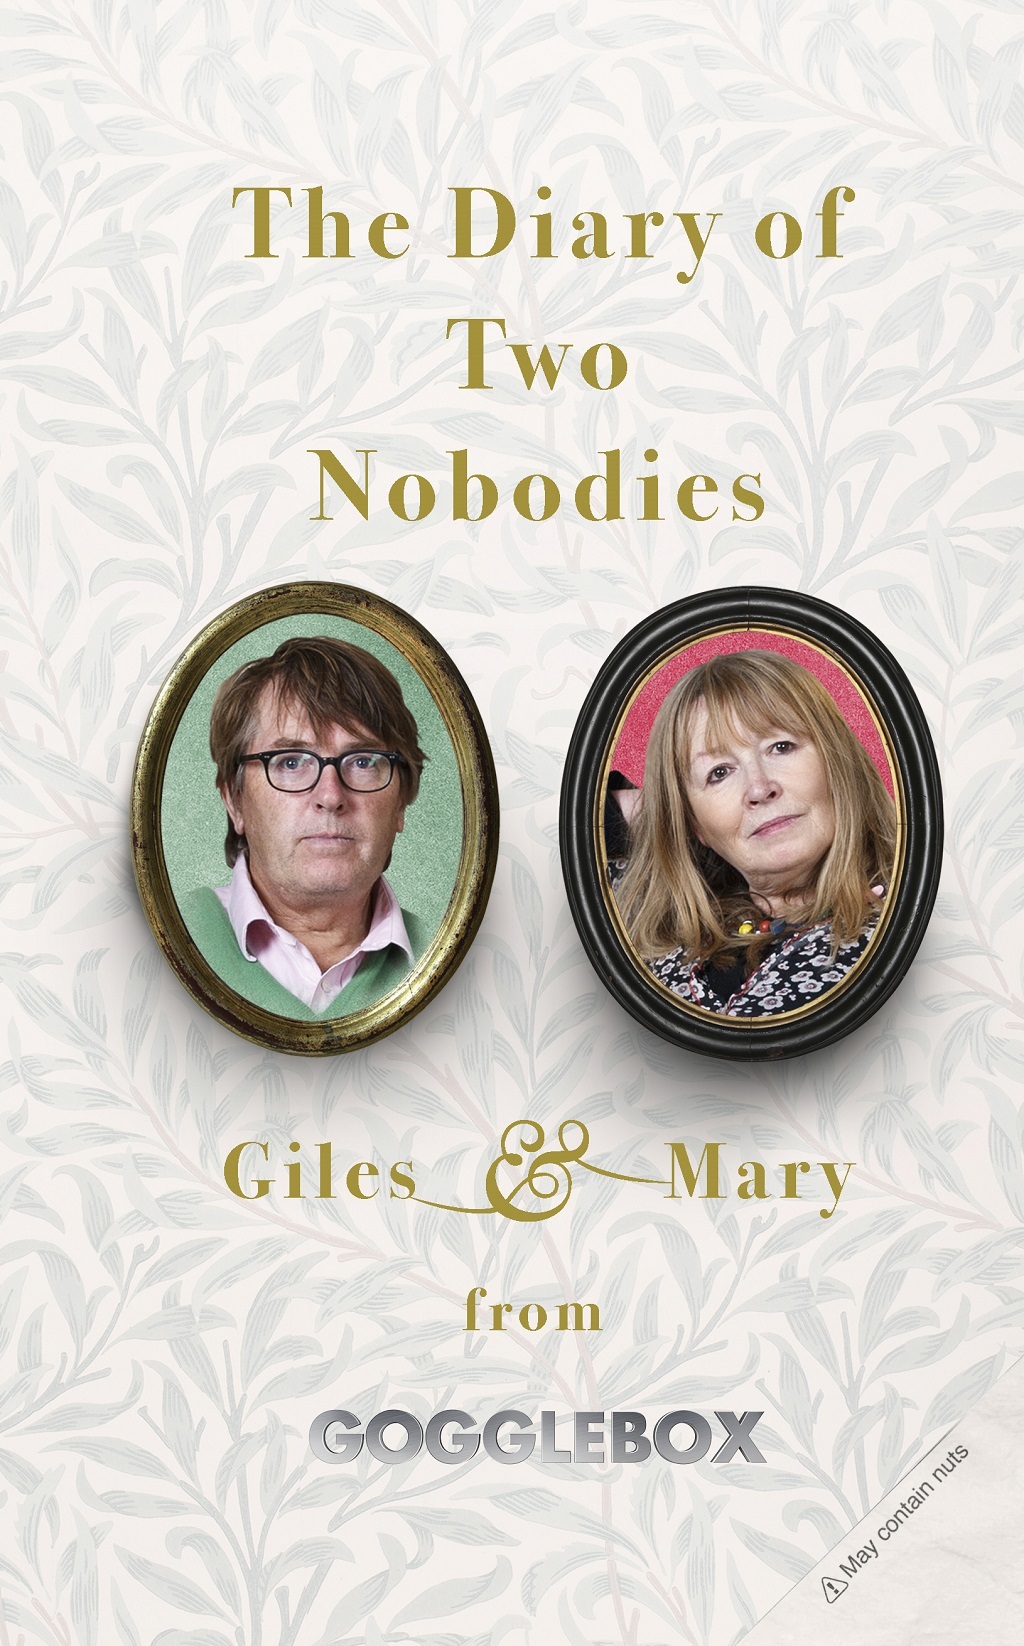 The Diary of Two Nobodies, by Gogglebox's Giles Wood and Mary Killen 